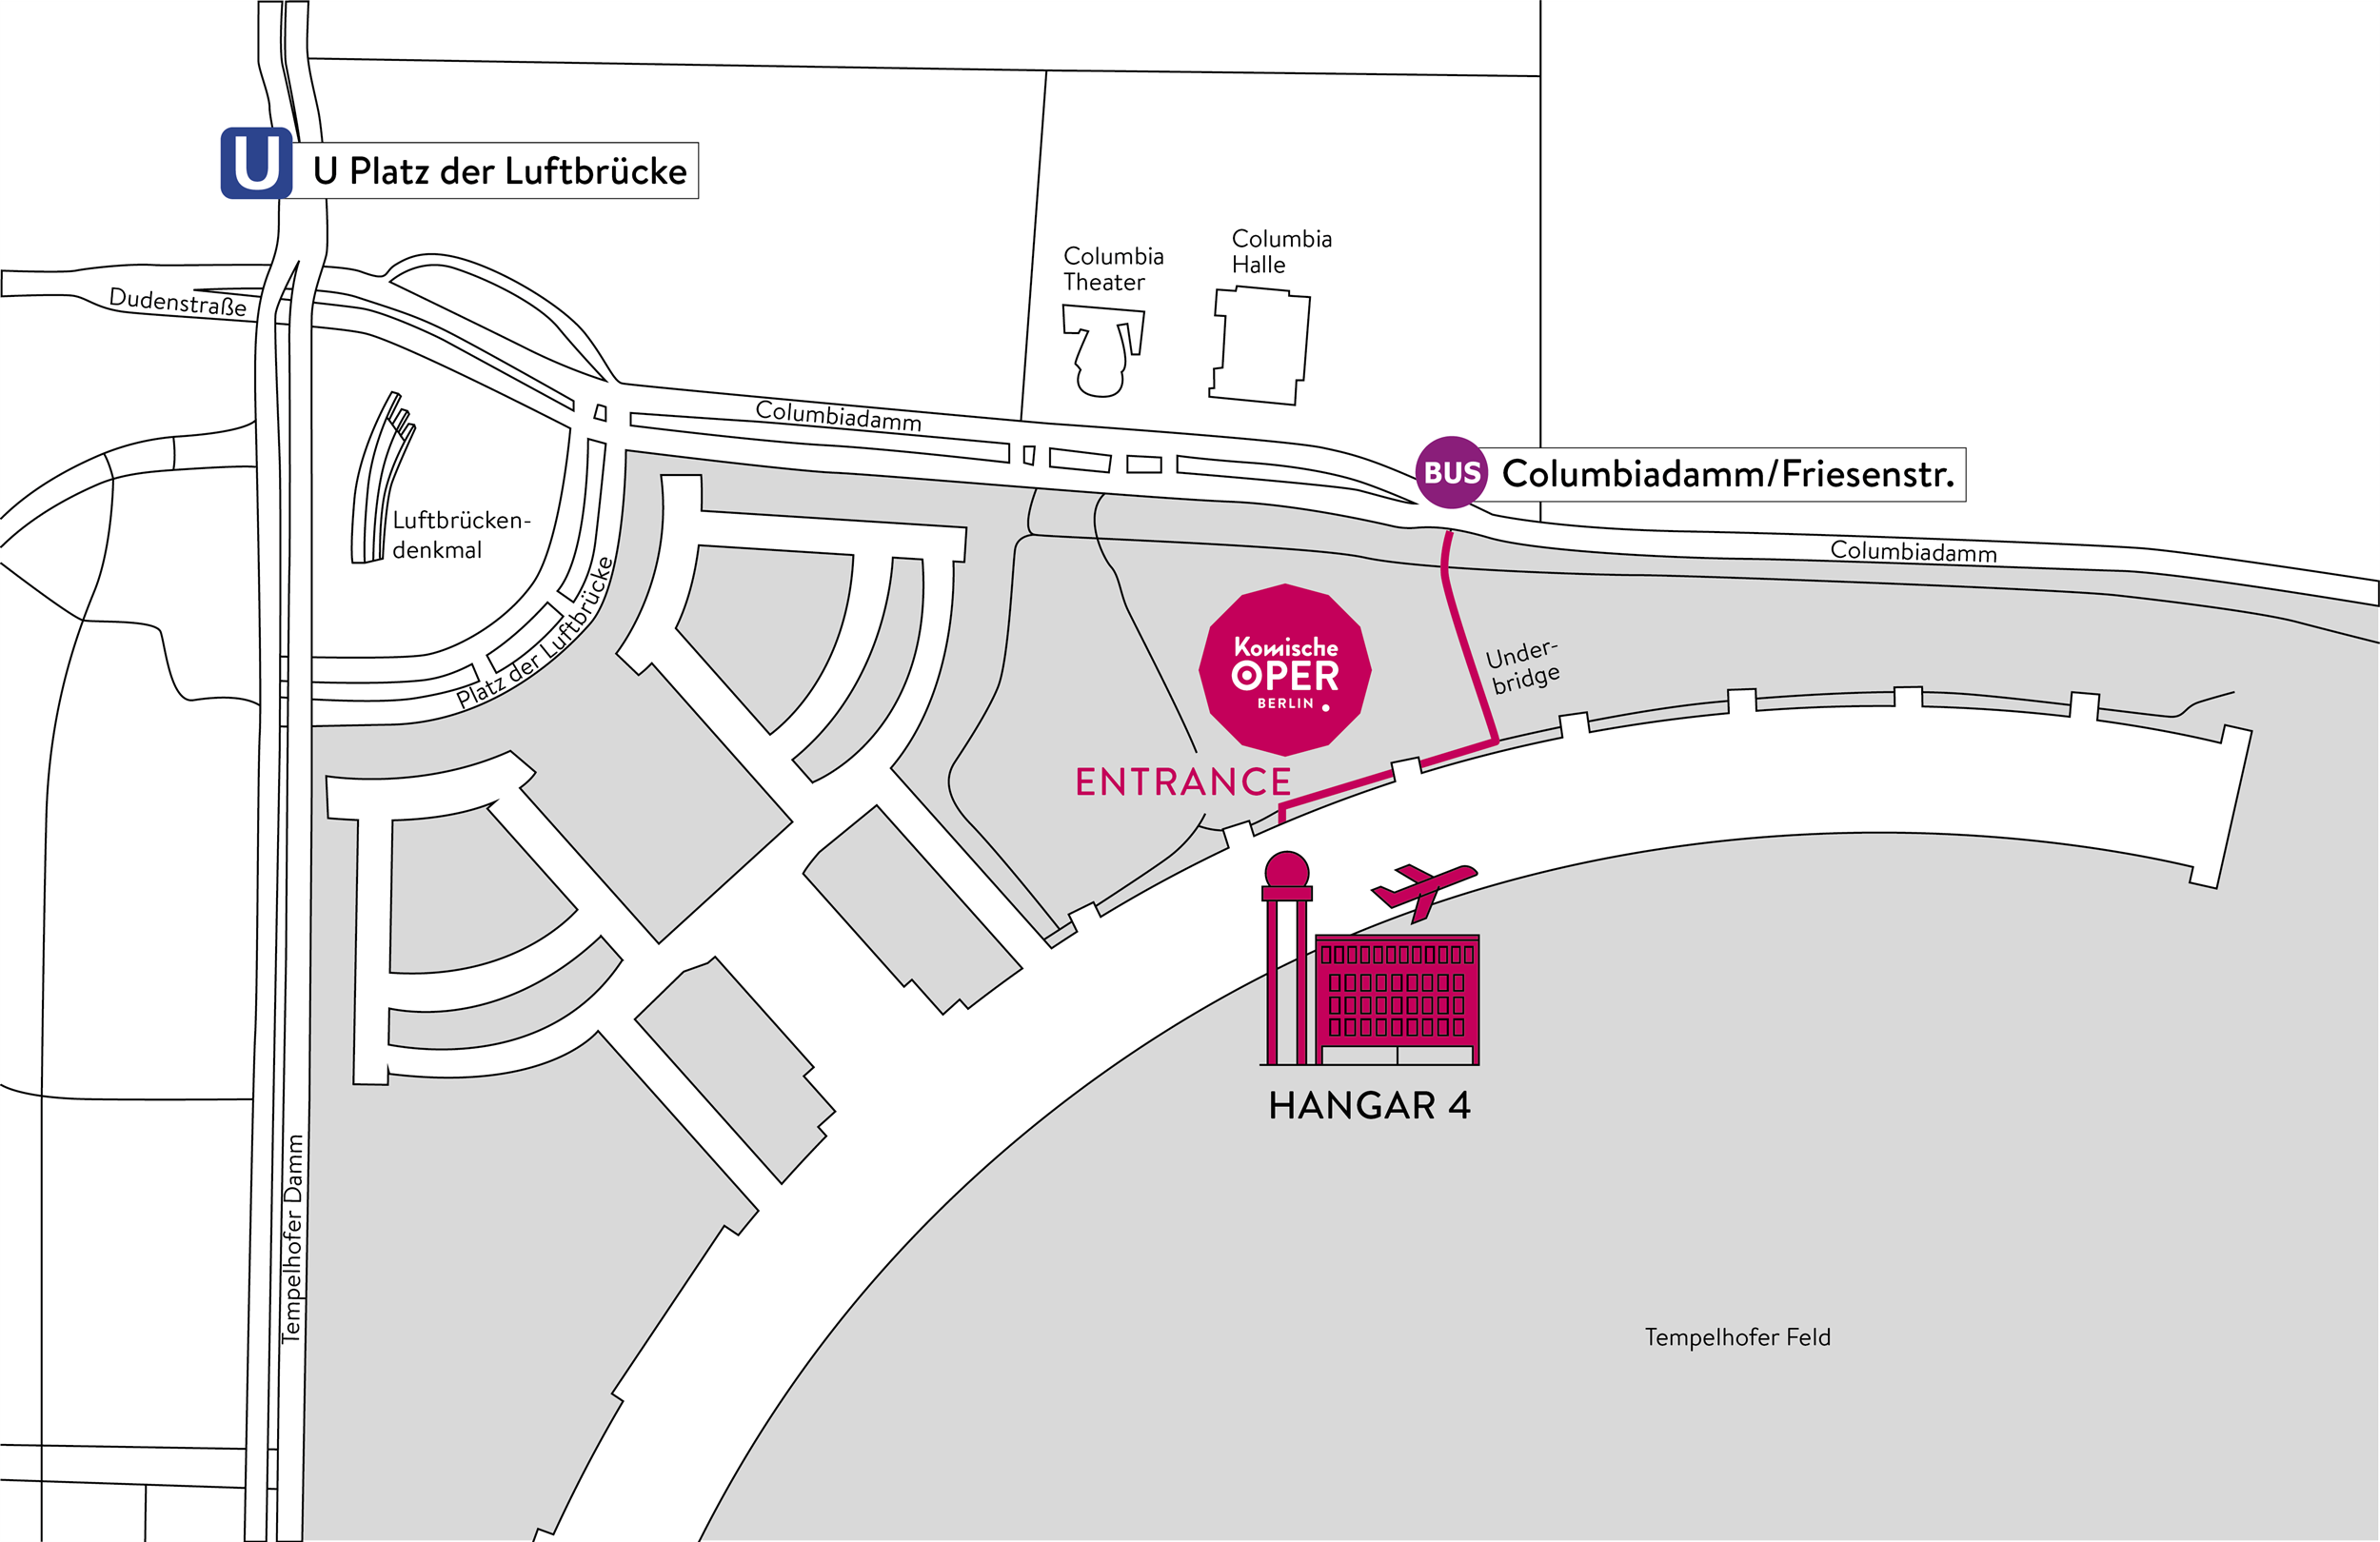 Graphic directions to the entrance of the Komische Oper Berlin in Hangar 4, opens Google Maps